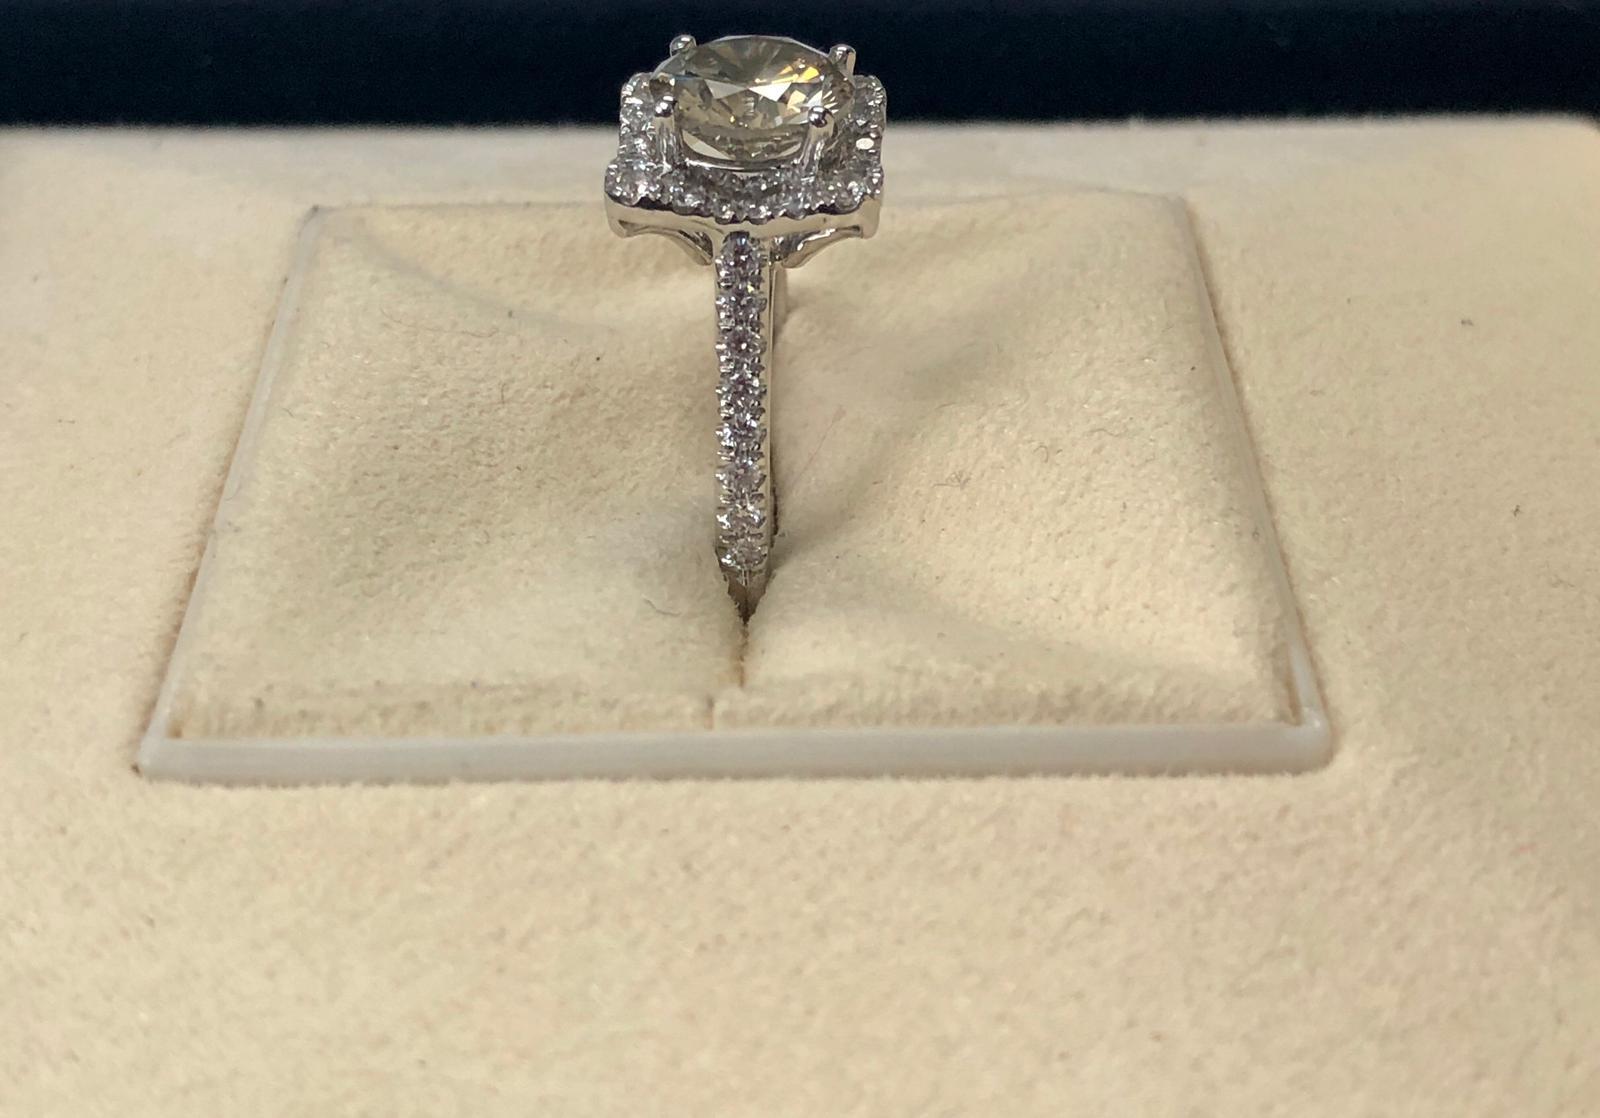 This is a natural fancy brown-greenish yellow natural round diamond weighing 1.70 carats by GIA.  Half way paved white diamonds in the halo setting. Its transparency and luster are excellent. set on 18K white gold, this ring is the ultimate gift for